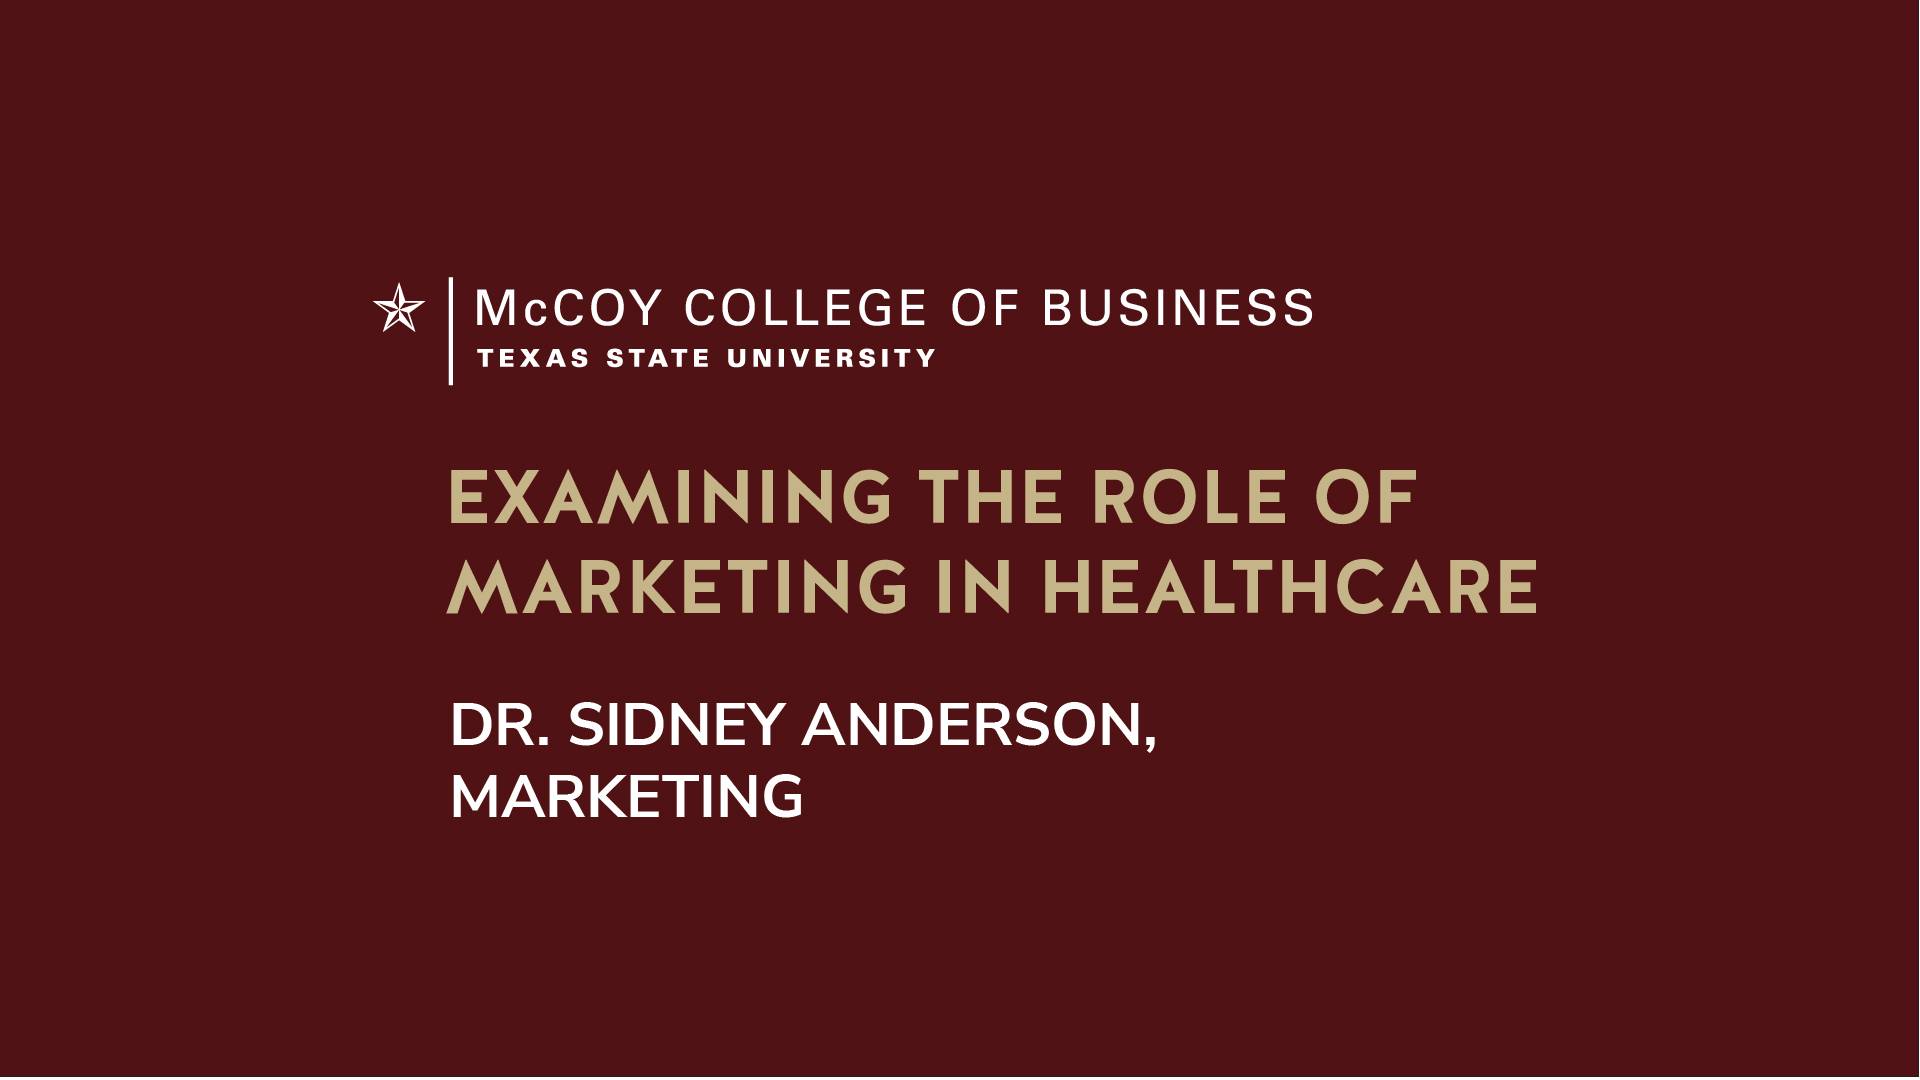 Dr. Sidney Anderson discusses the role of marketing in healthcare